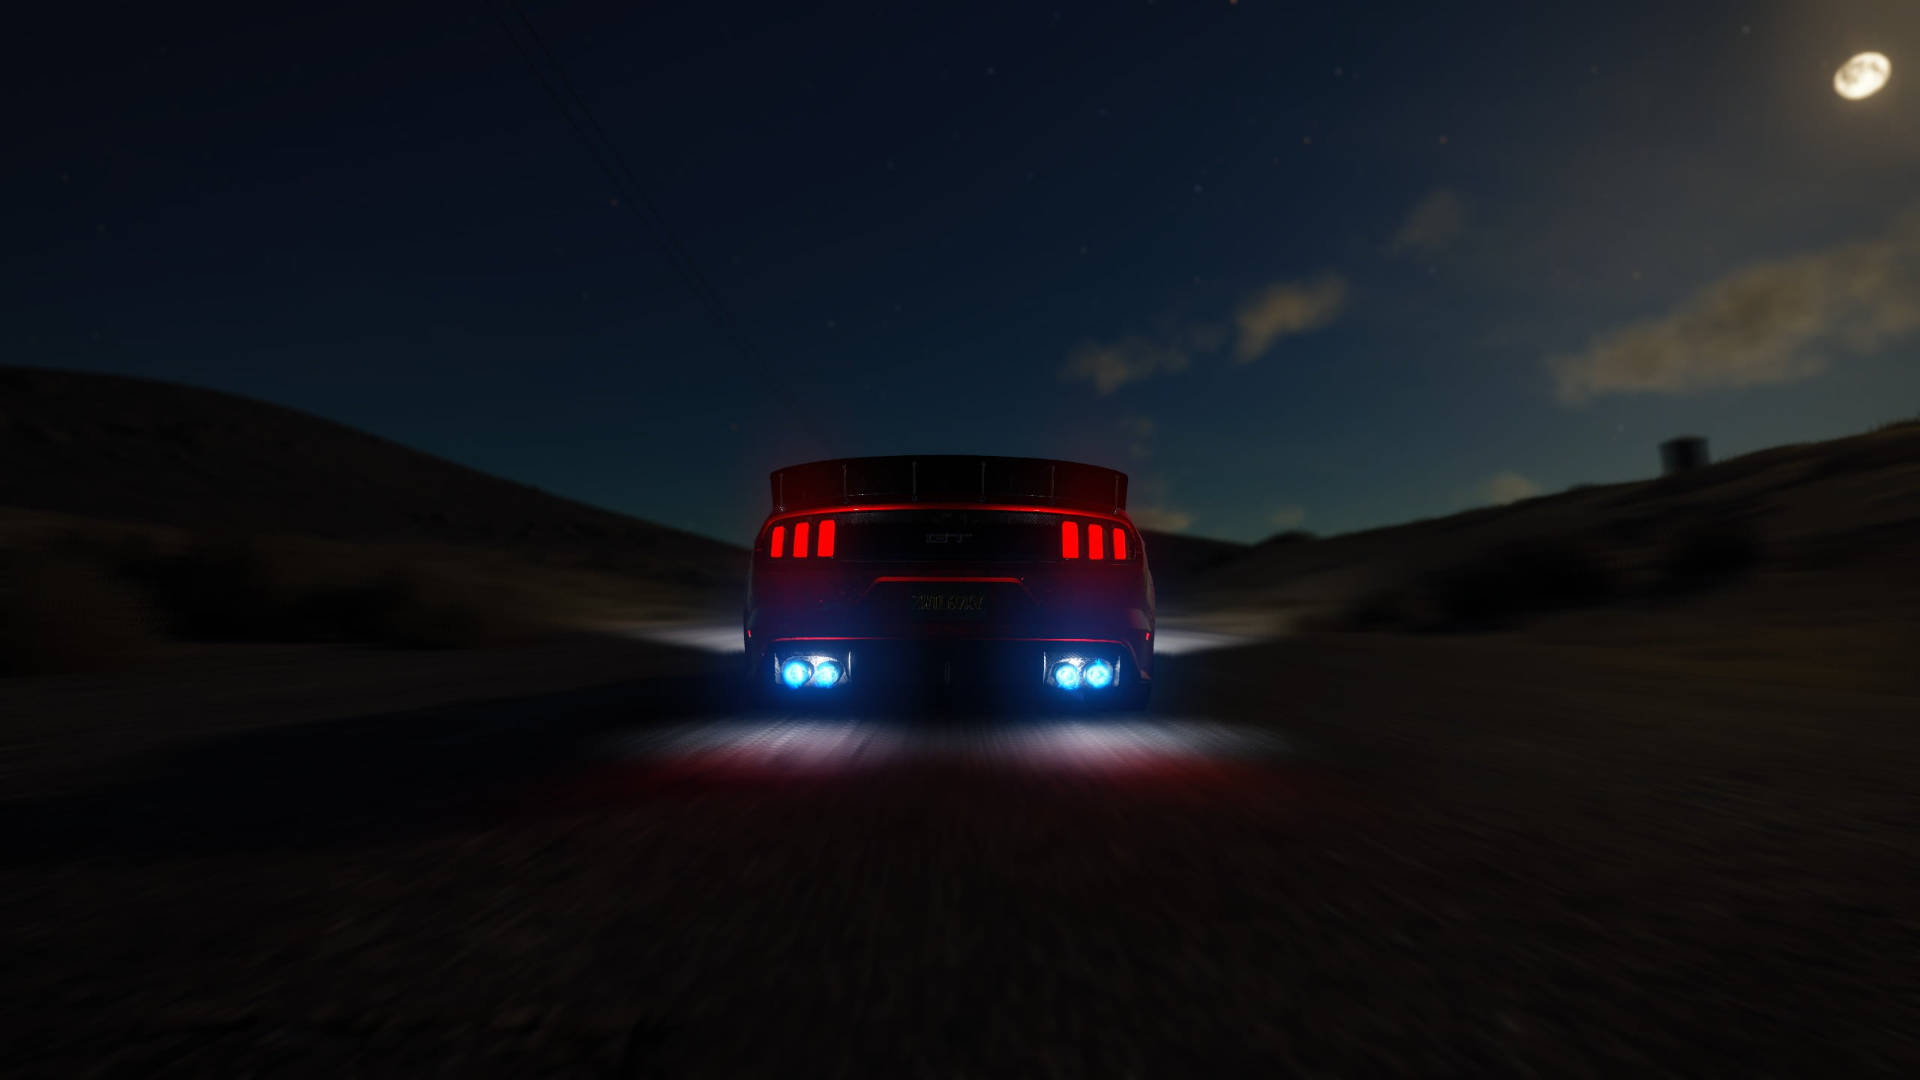 Captivating Night Drive with the Ford Mustang HD Wallpaper